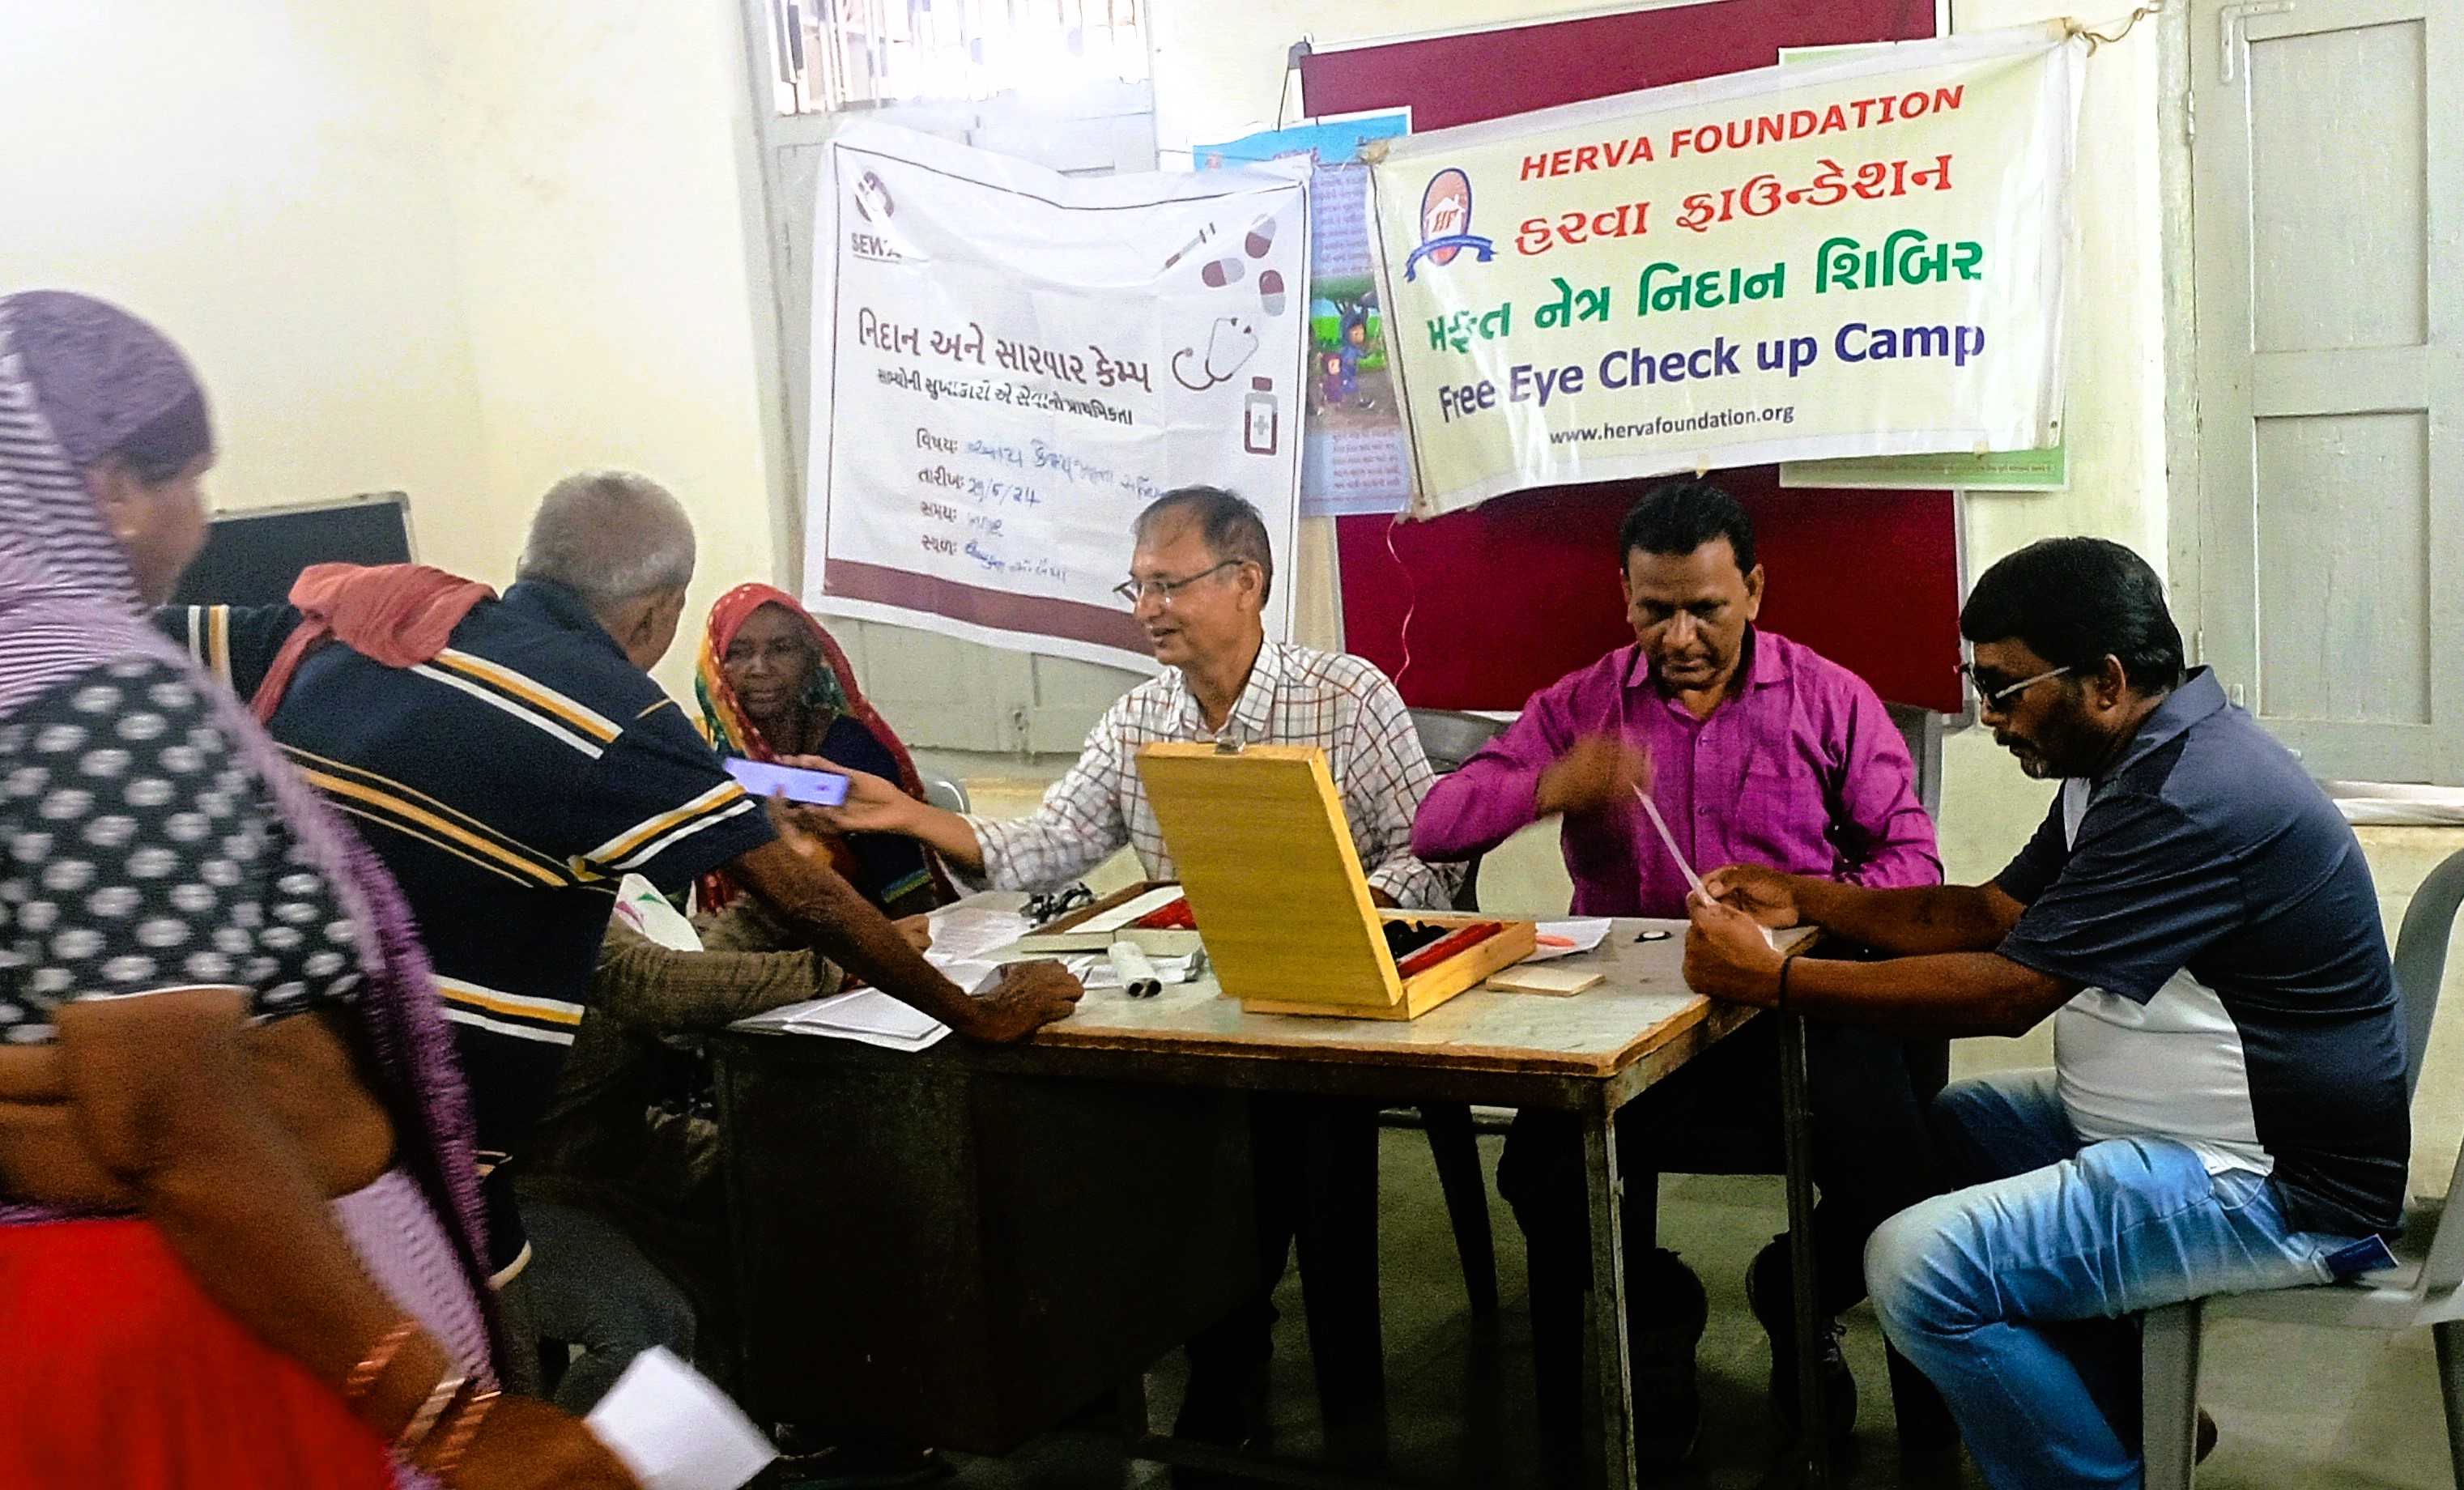 On 29th June 24 Sat, we had a successful Eye care and distribution of spectacles camp at the village Solaiya taluka Mansa Jilla Gandhinagar, Gujarat. A total of 220 villagers turned out for a check-up 
We have distributed 190 spectacles to needy villagers.
We thank Mrs. Anita Ben Patel of SEWA, Gandhinagar for introducing this village and providing the necessary arrangements.